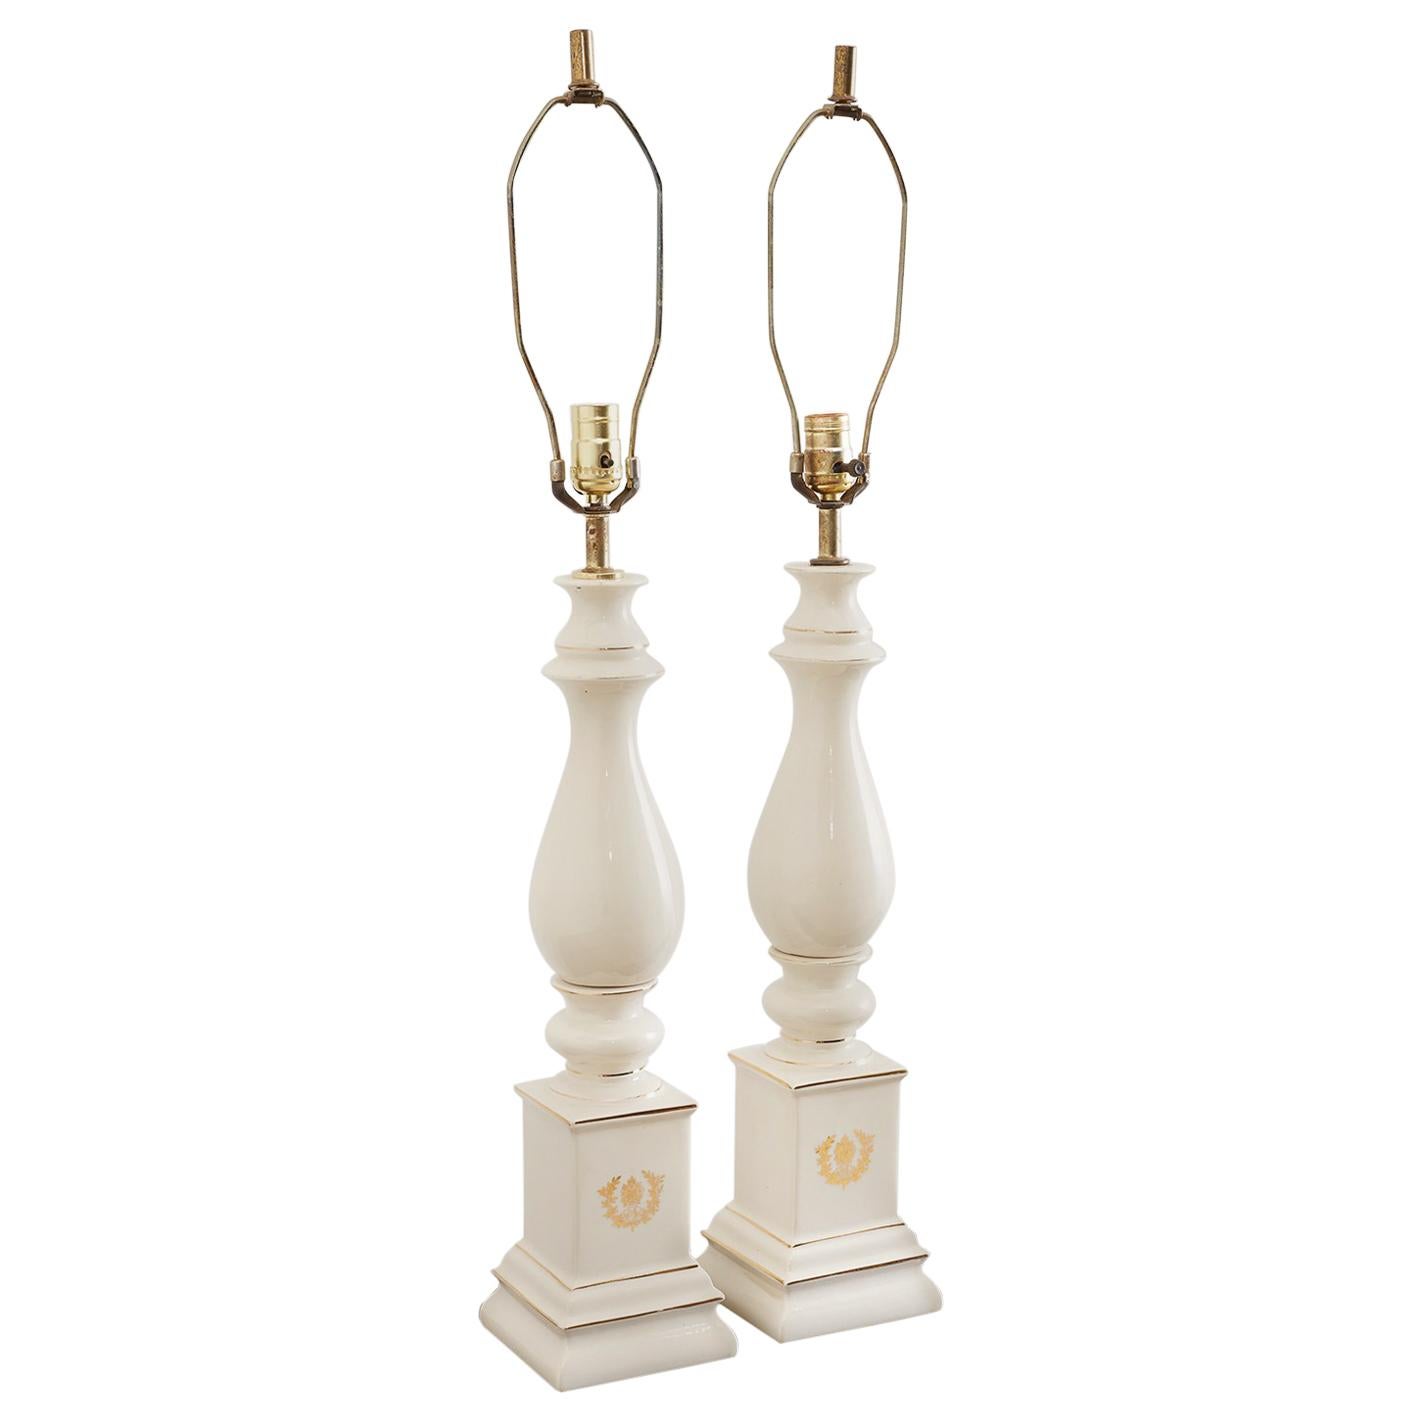 Pair of Neoclassical White Porcelain Baluster Lamps